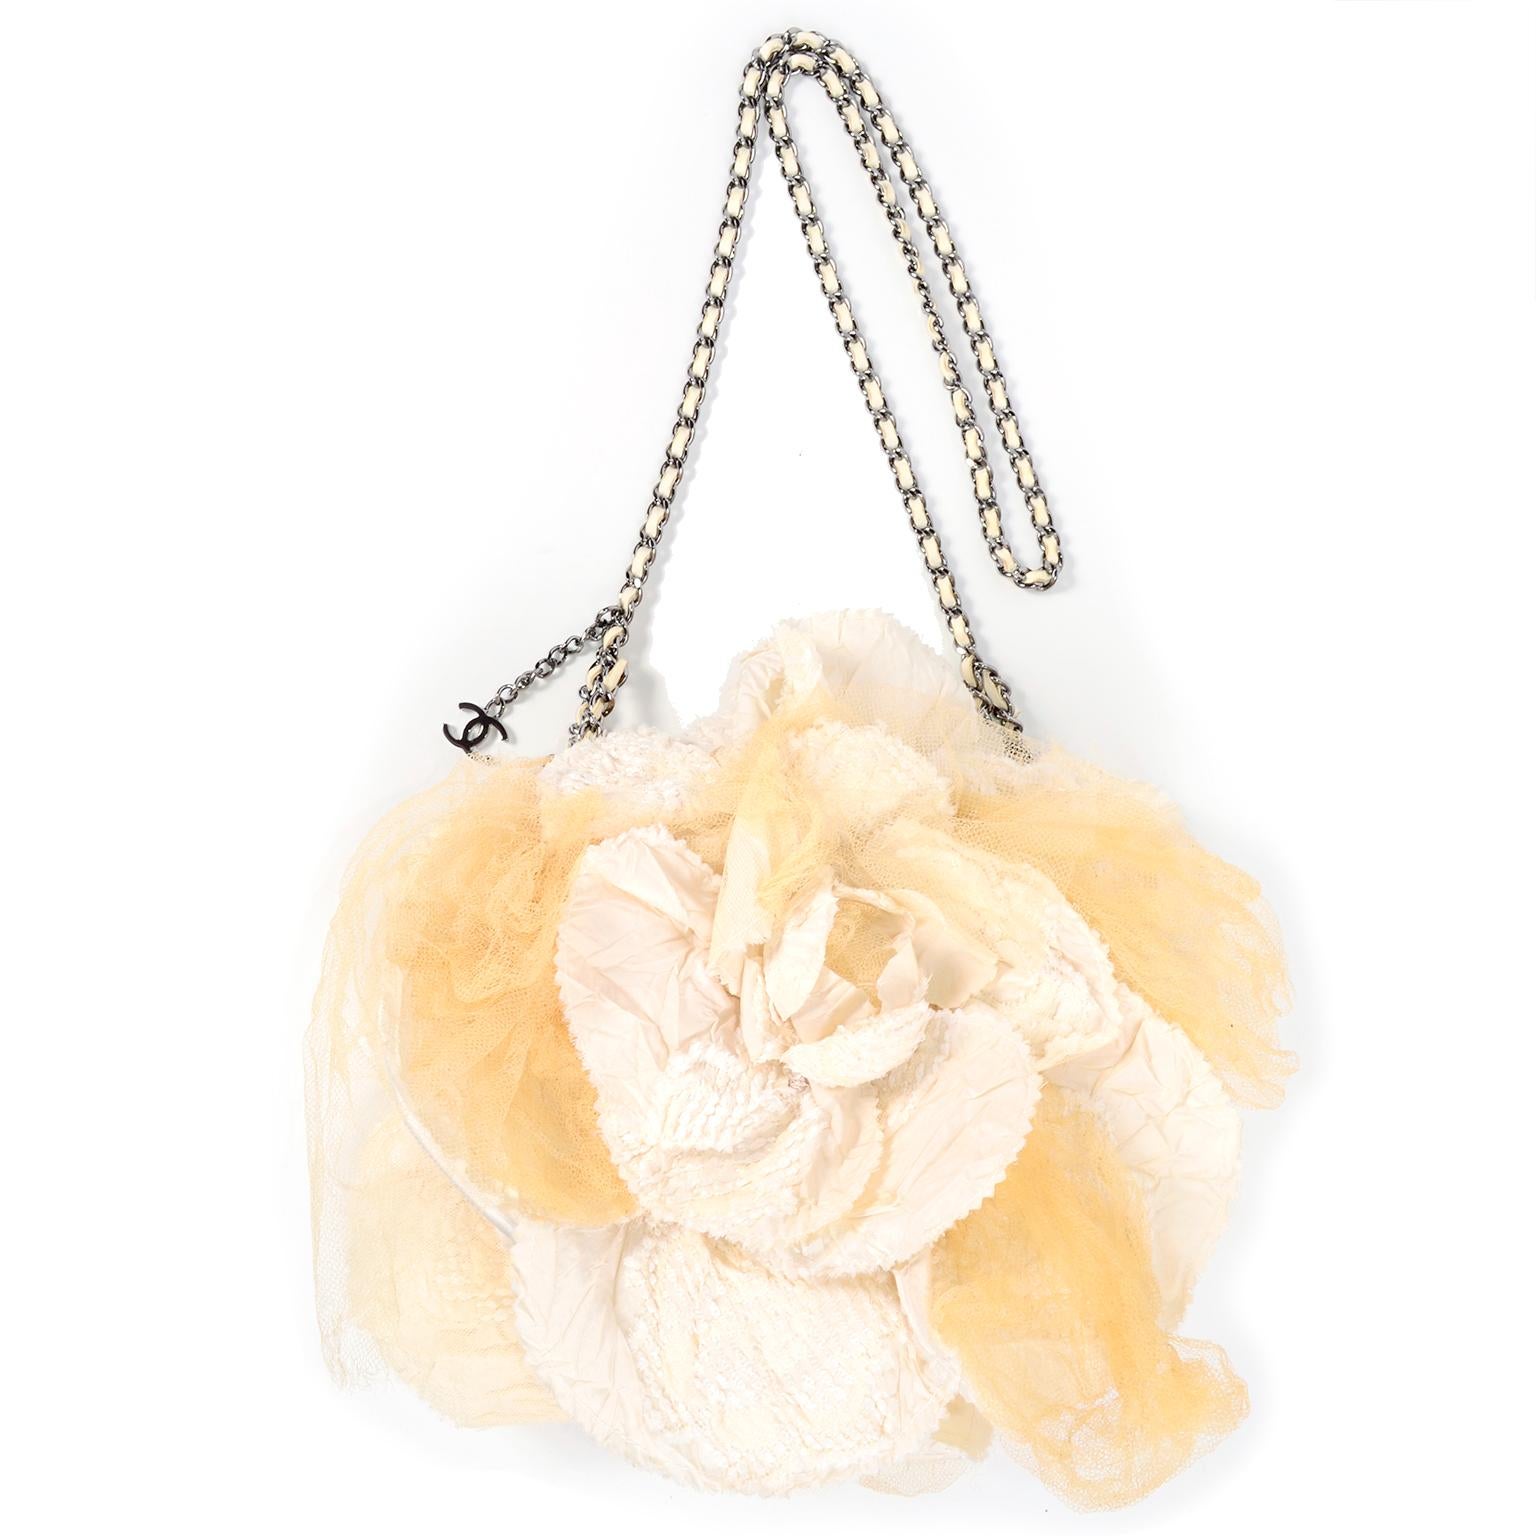 This is a beautiful Chanel cream silk handbag with a darker cream netting or tulle that forms a camellia flower on front and back. The netting is intentionally frayed at the ends and the bag closes with a snap on the  top and has a silver tone metal